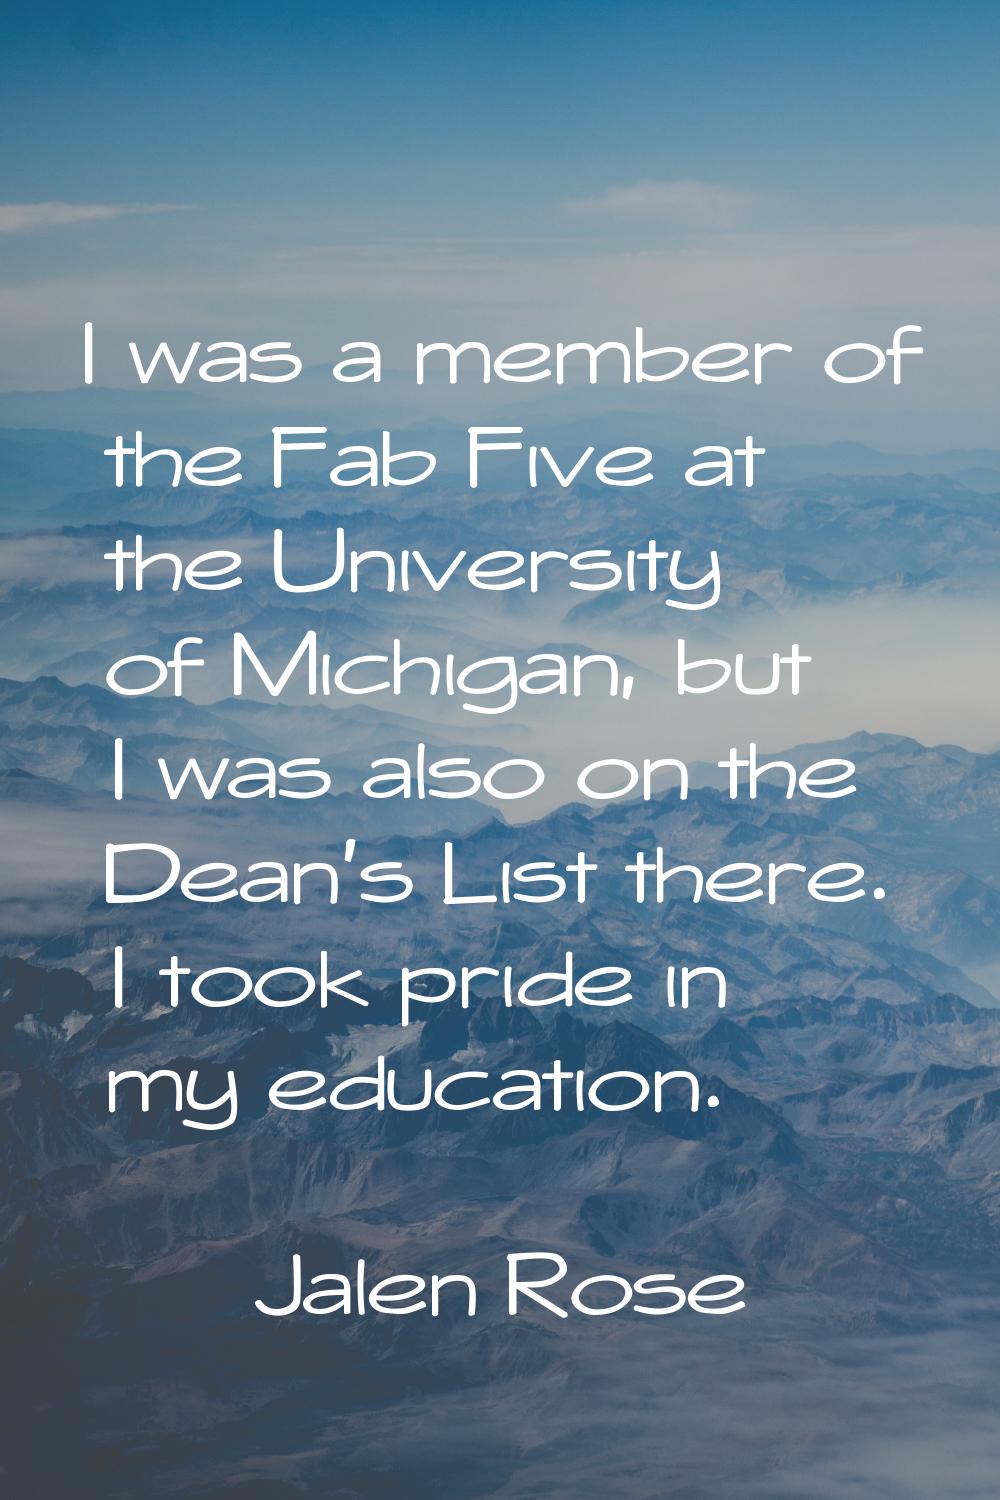 I was a member of the Fab Five at the University of Michigan, but I was also on the Dean's List the